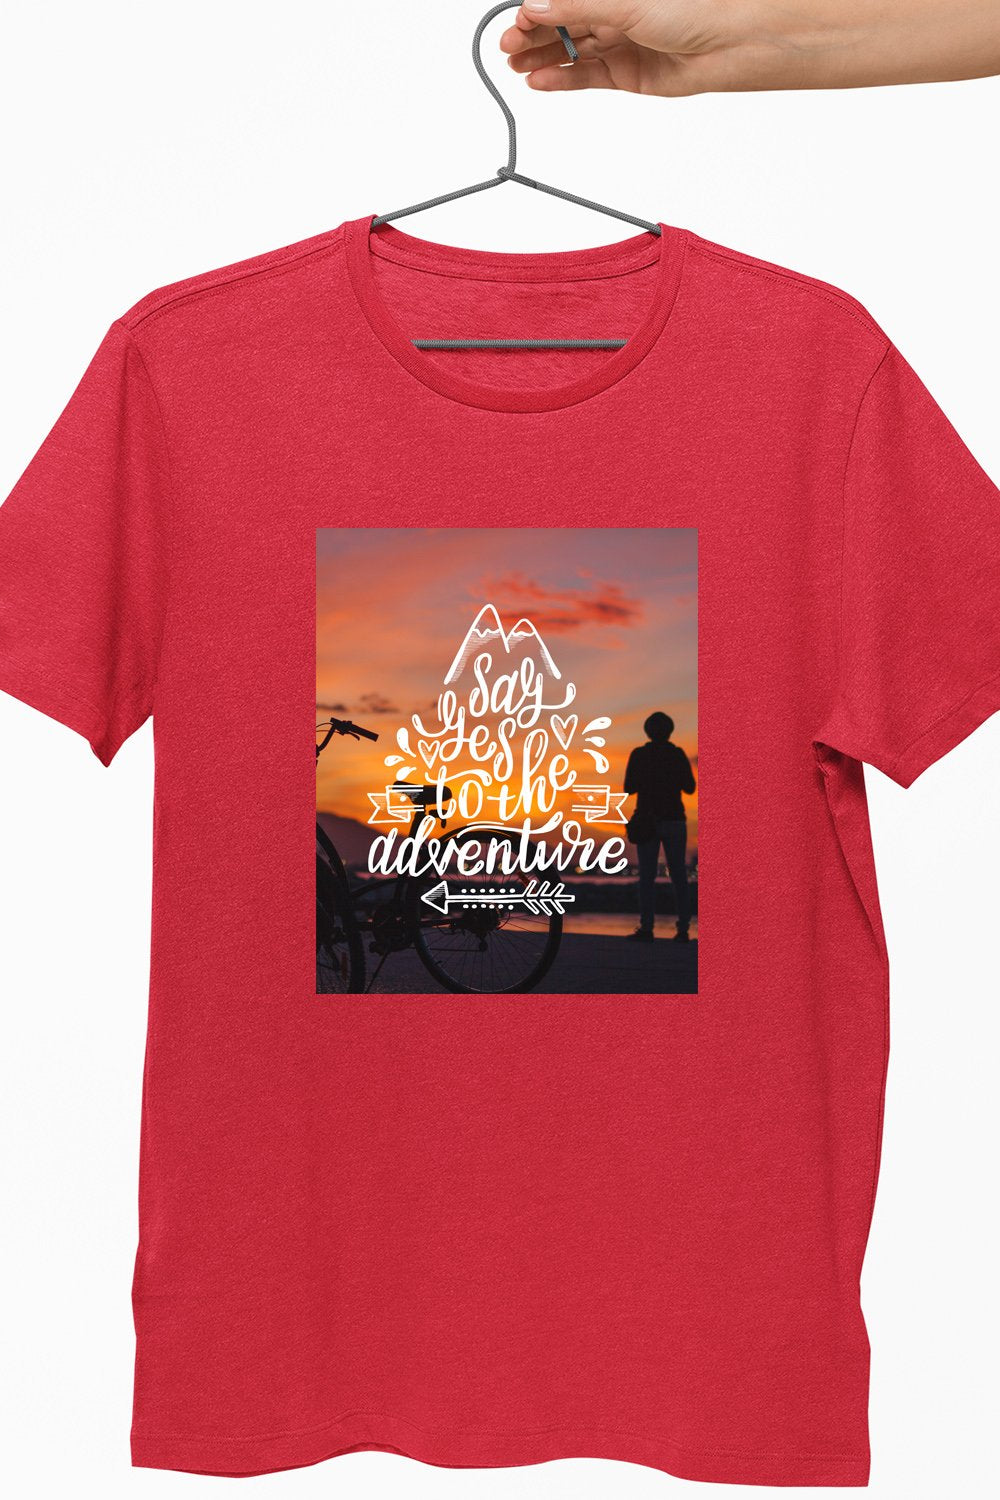 Say Yes To The Adventure Red Tshirt